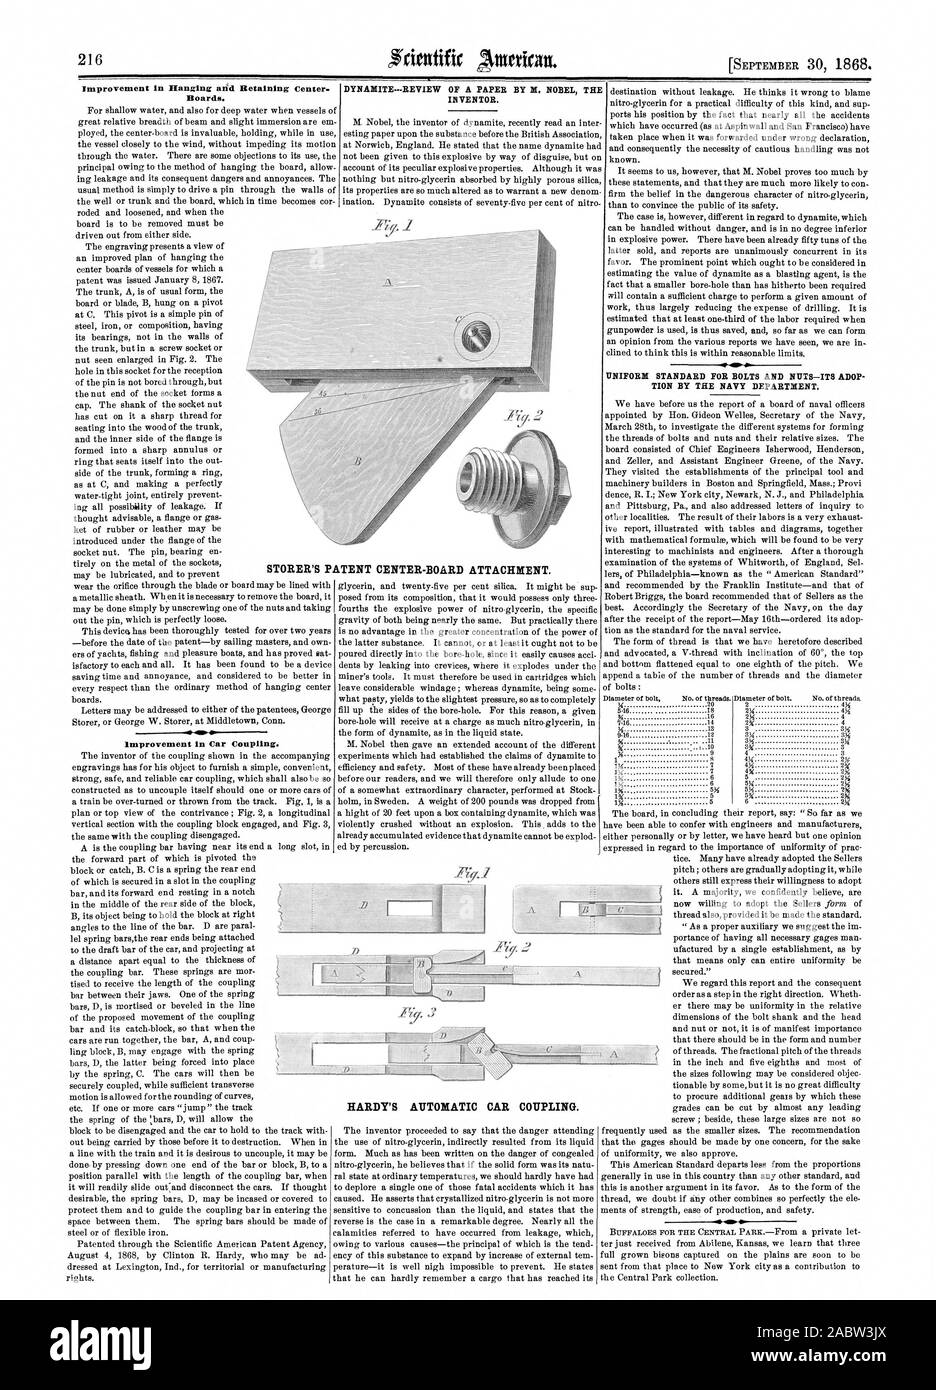 STORER'S PATENT CENTER-BOARD ATTACHMENT. Improvement in Hanging and Retaining Censer. Boards. Improvement in Car Coupling. UNIFORM STANDARD FOR BOLTS AND NUTS—ITS ADOP TION BY THE NAVY DEPARTMENT. 34 34 234 DYNAMITE—REVIEW OF A PAPER BY IL NOBEL THE INVENTOR. HARDY'S AUTOMATIC CAR COUPLING., scientific american, 1868-09-30 Stock Photo